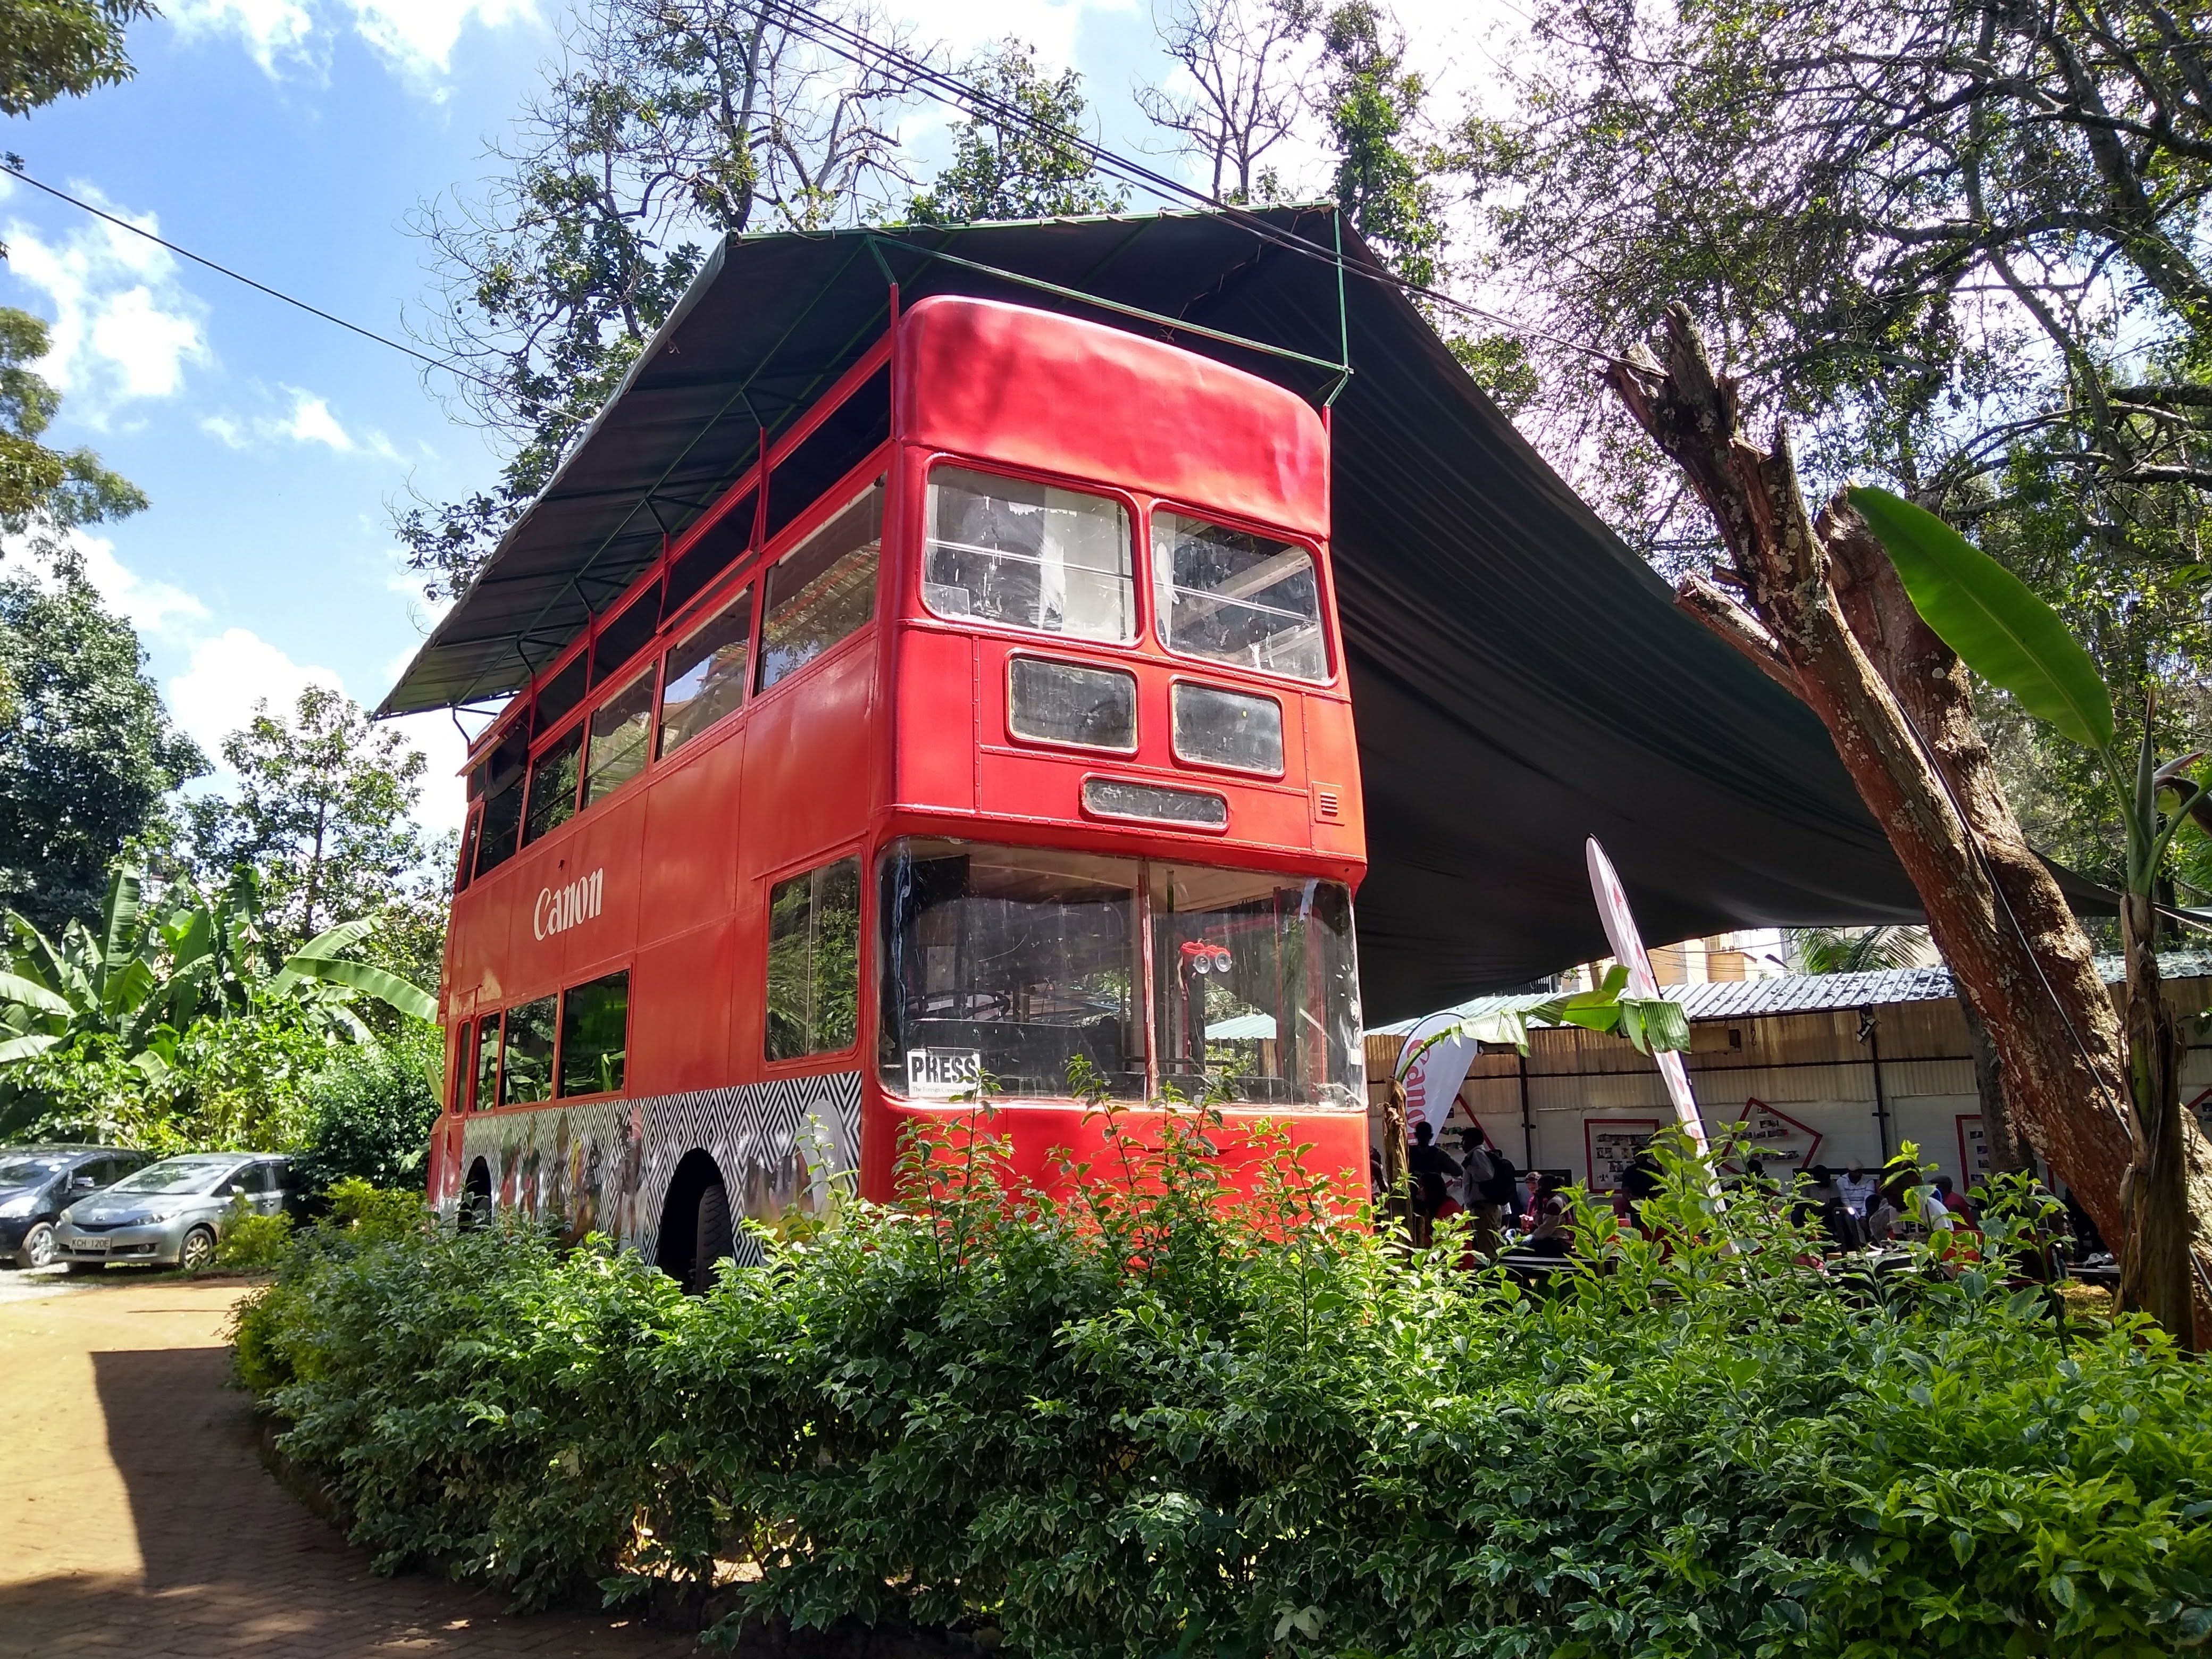 The Nairobi Bus, Kenya (Converted Bus that's a Canon Photography Workshop)